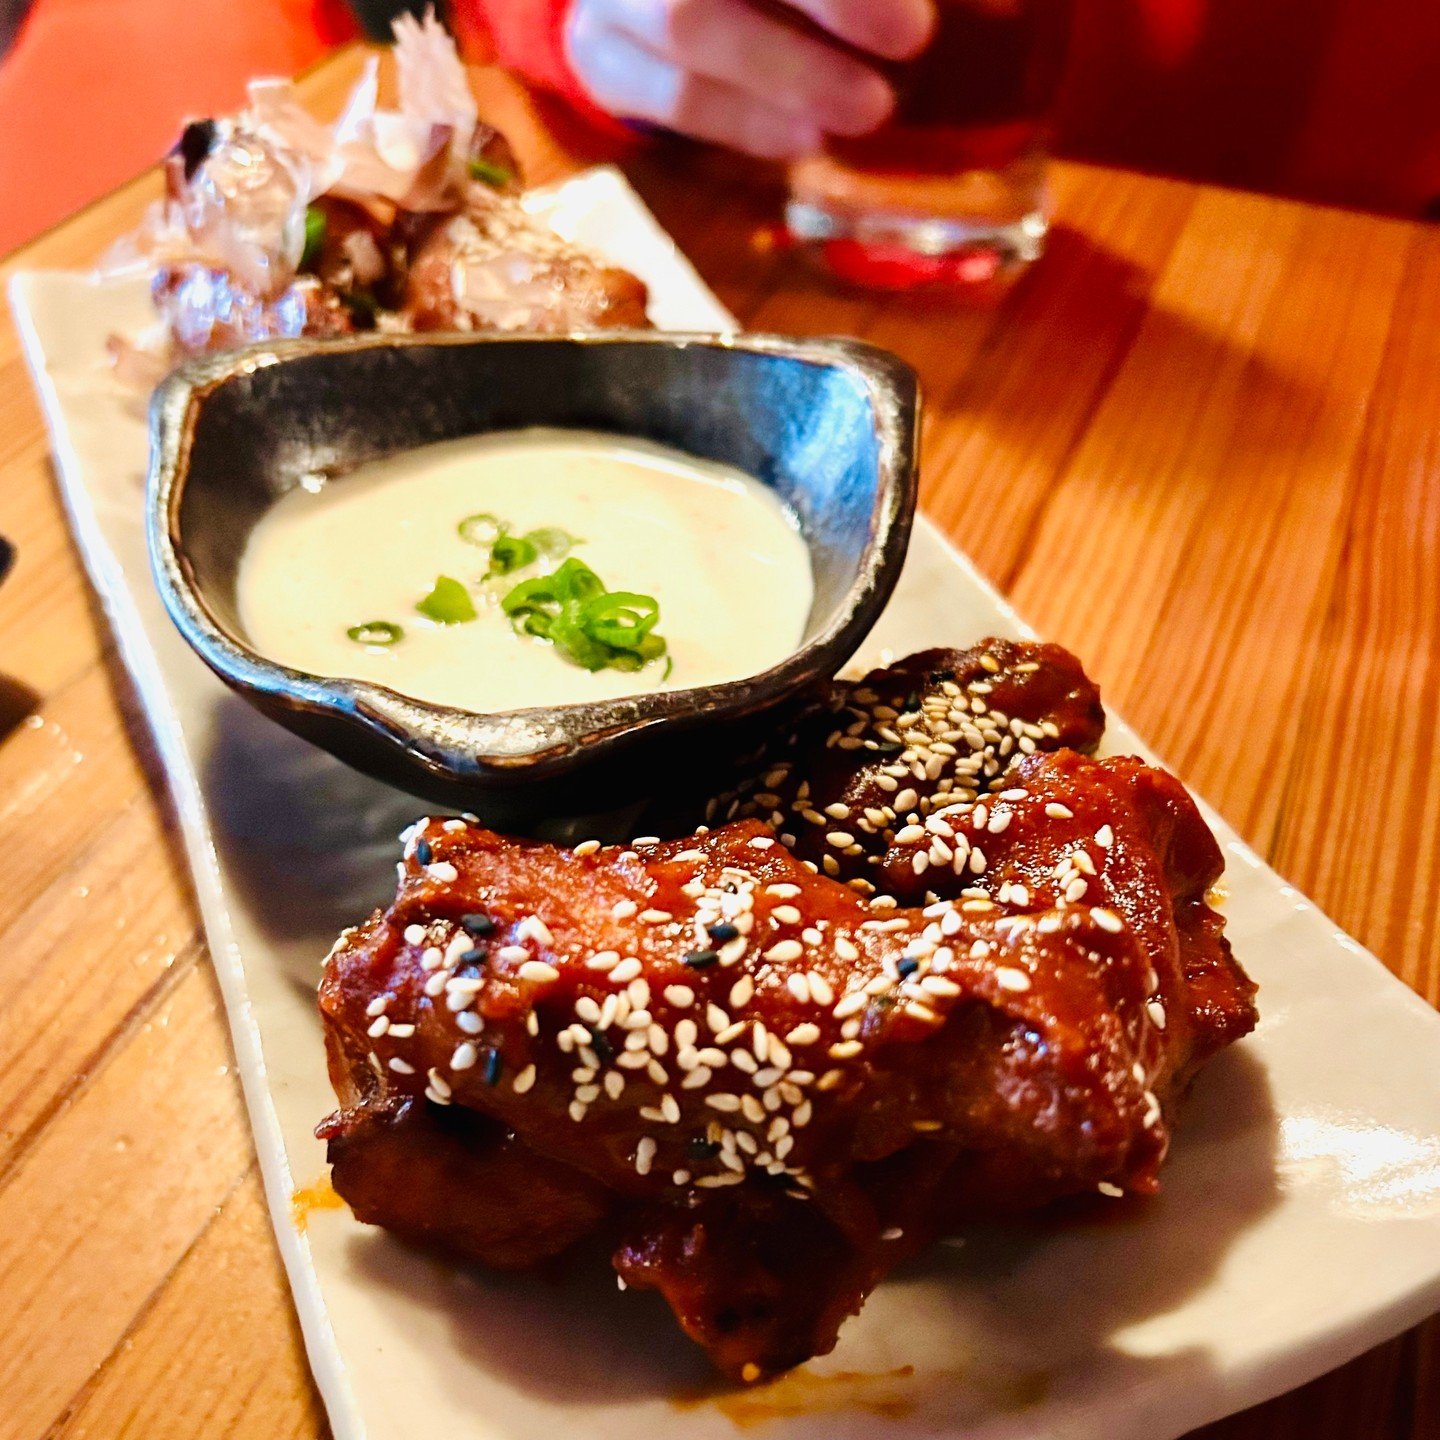 Happy May! Kick off the start of the new month with a few $1 wings! This incredible special is available every weekday from 3-5pm. Stop by the ramen shop or izakaya &amp; enjoy these yummy eats with us!